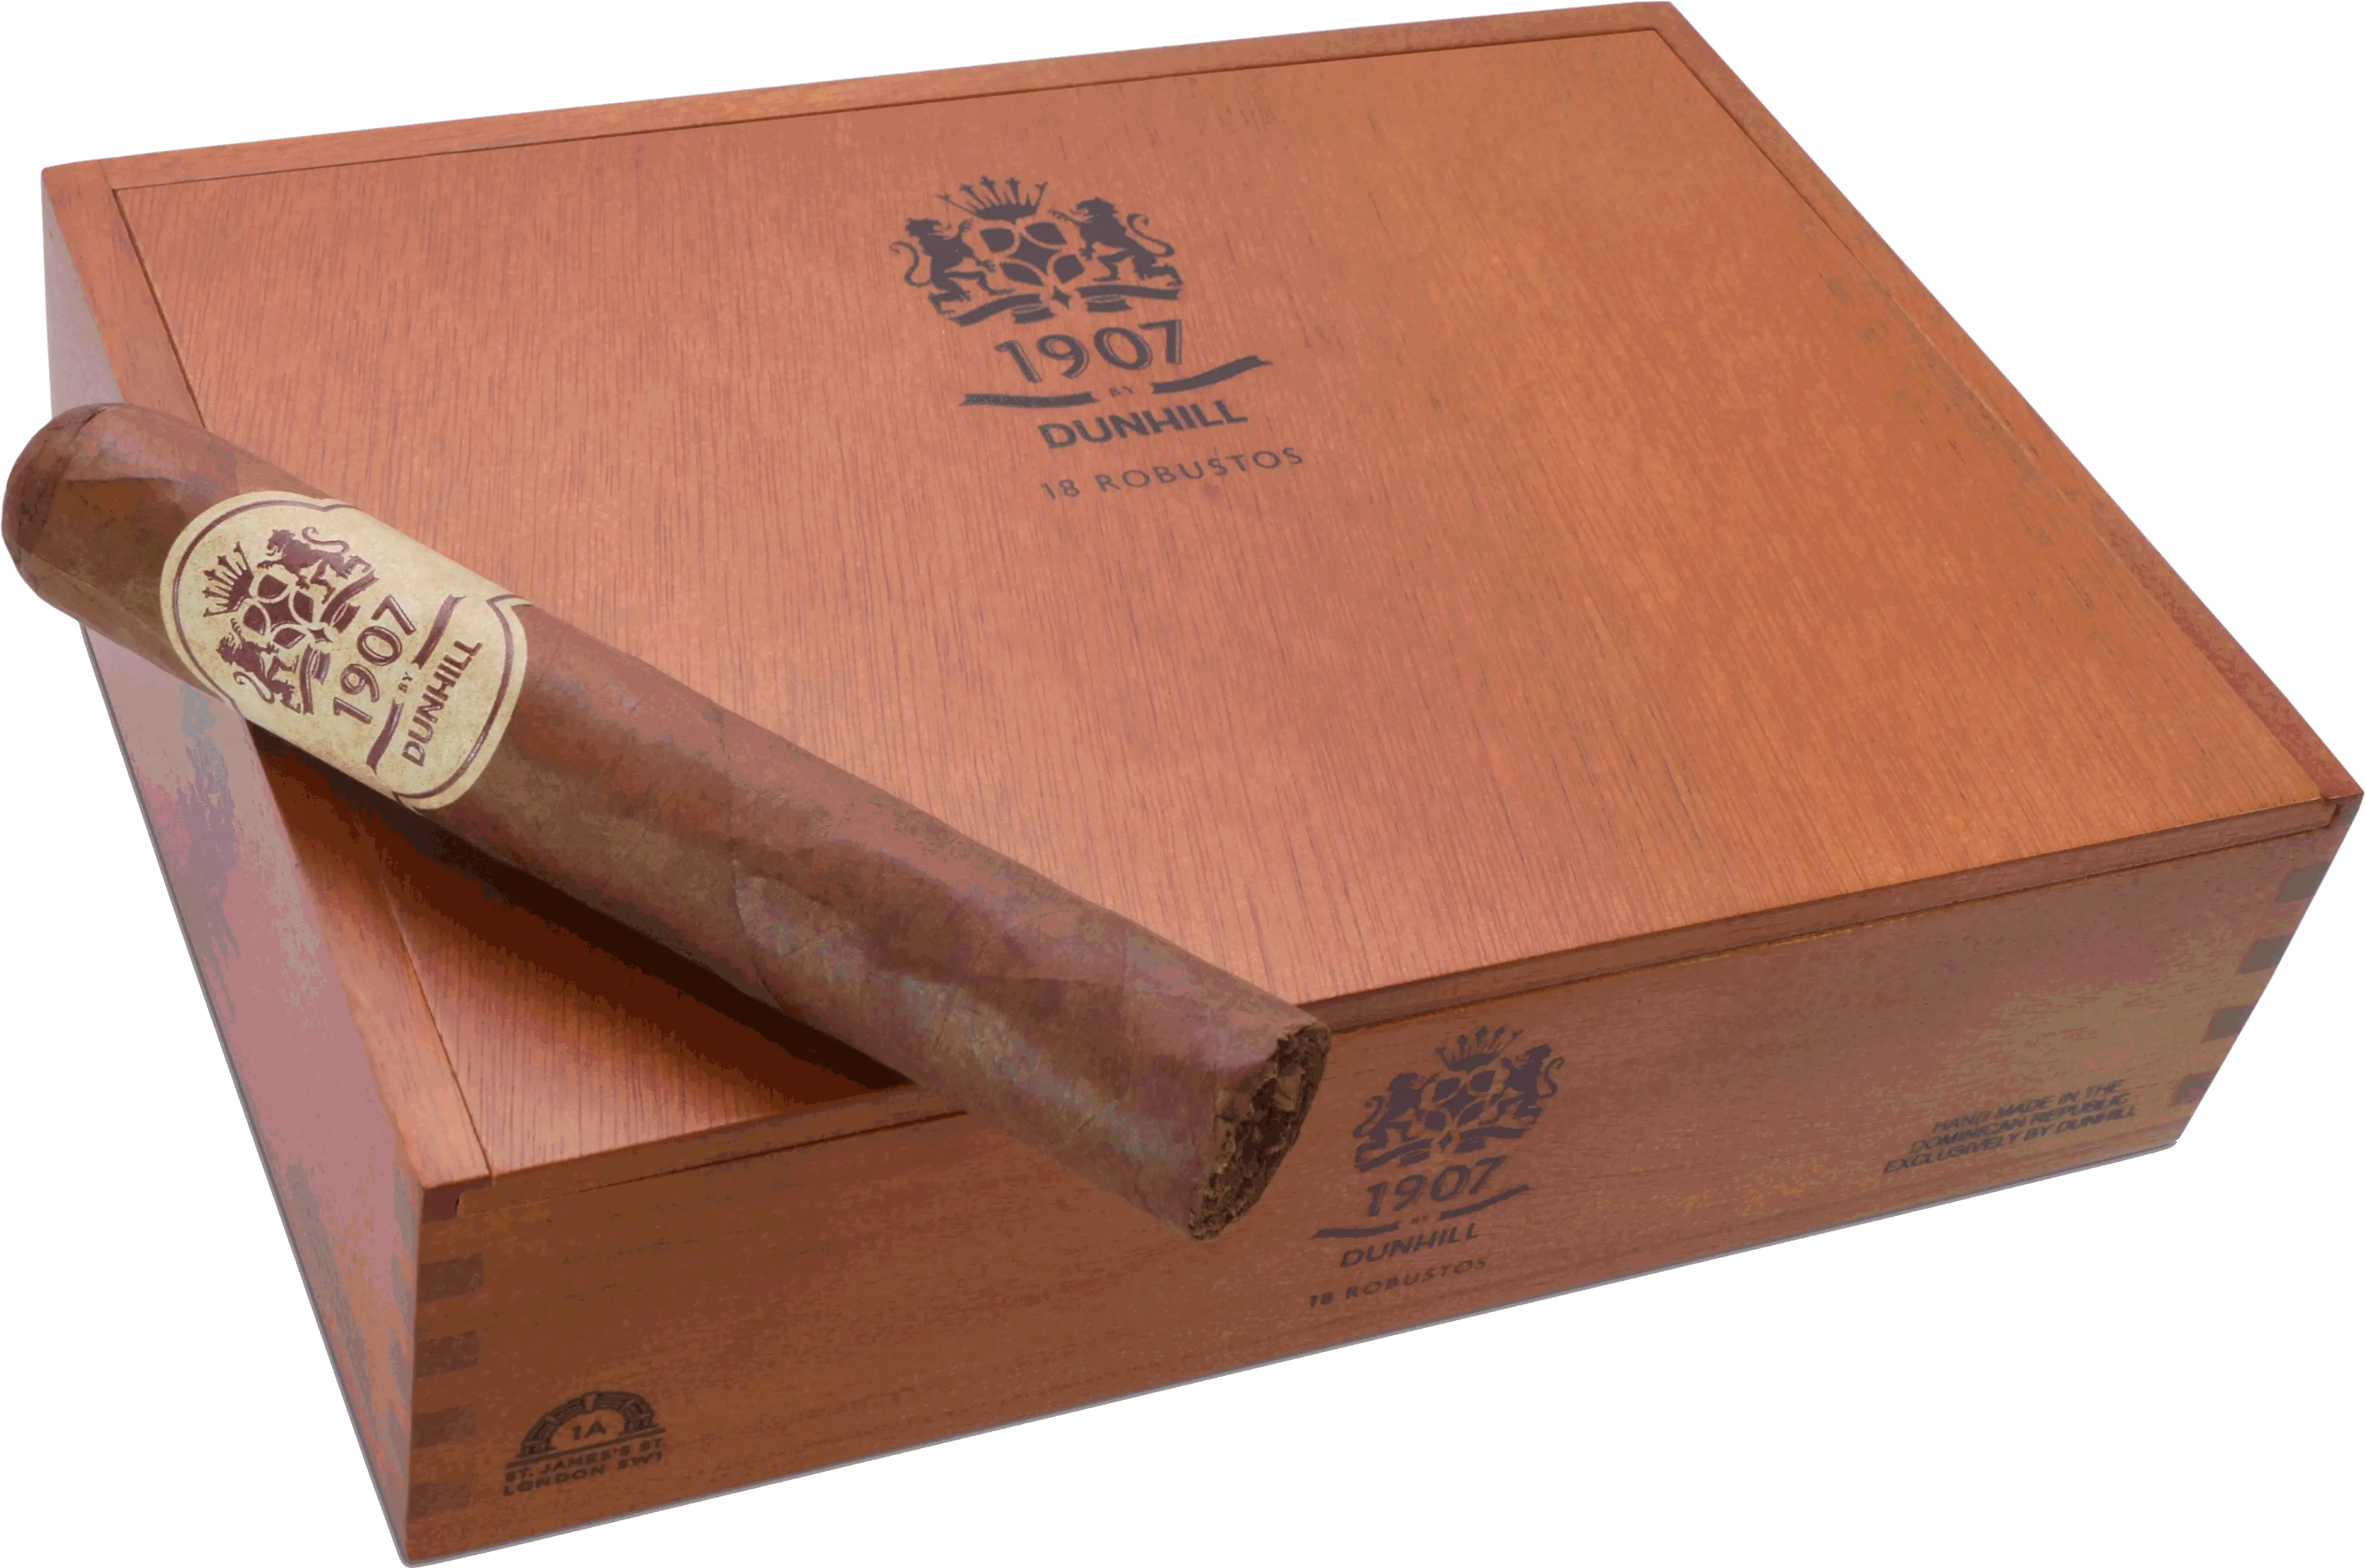 Download Hd 1907 By Dunhill Closed Box Dunhill 1907 Box Pressed Toro Png Cigar Png